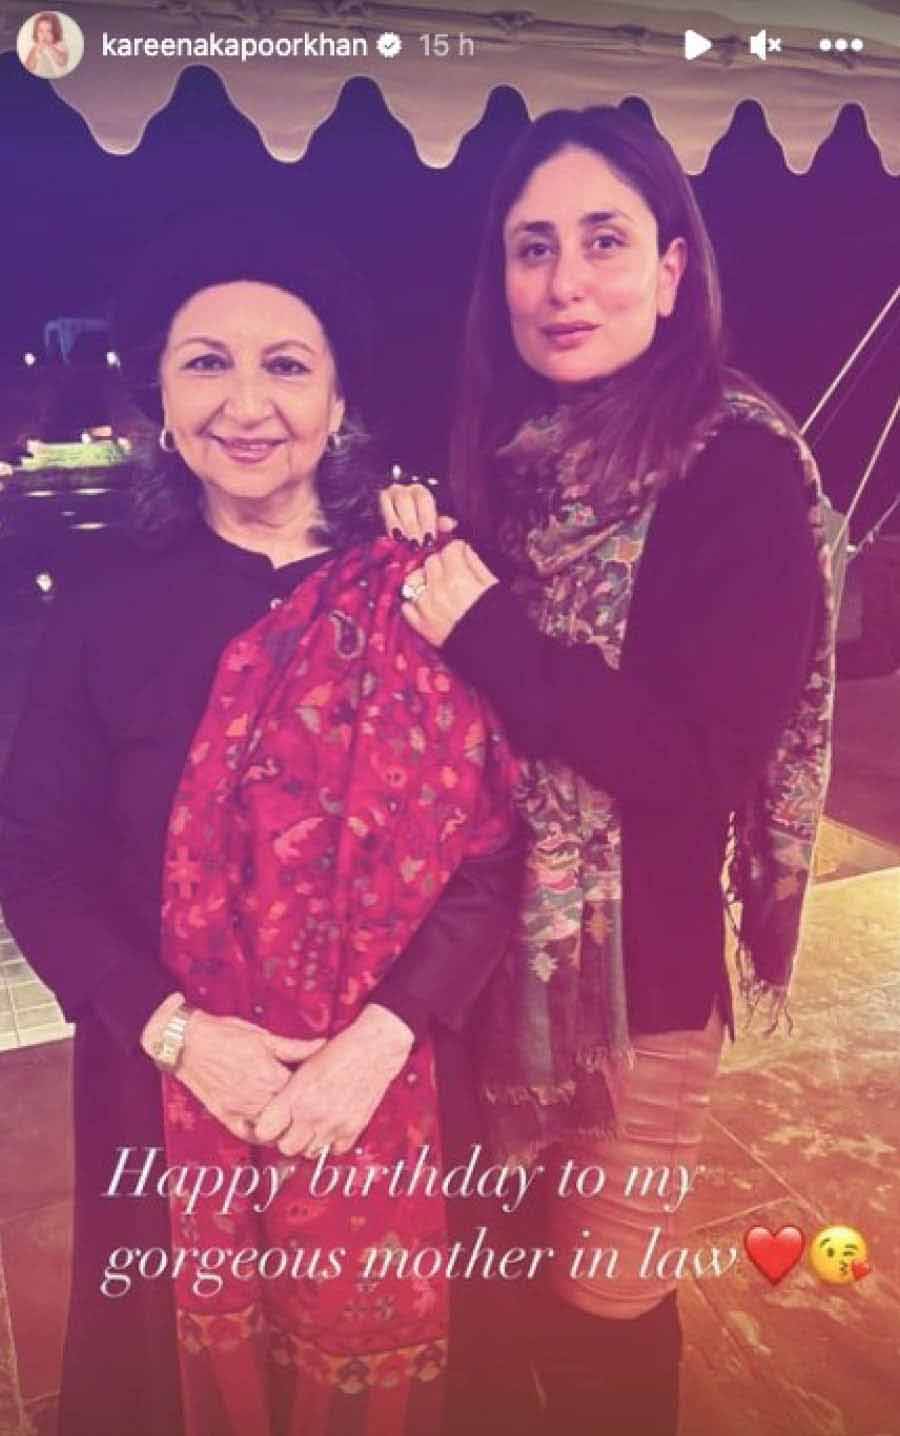 Kareena shared a picture of her with her “gorgeous mother in law” Sharmila as an Instagram story to wish the latter on her birthday. Sharmila looked elegant in a black kurta and red shawl. Kareena wore a black sweater, jeans and thigh high boots.